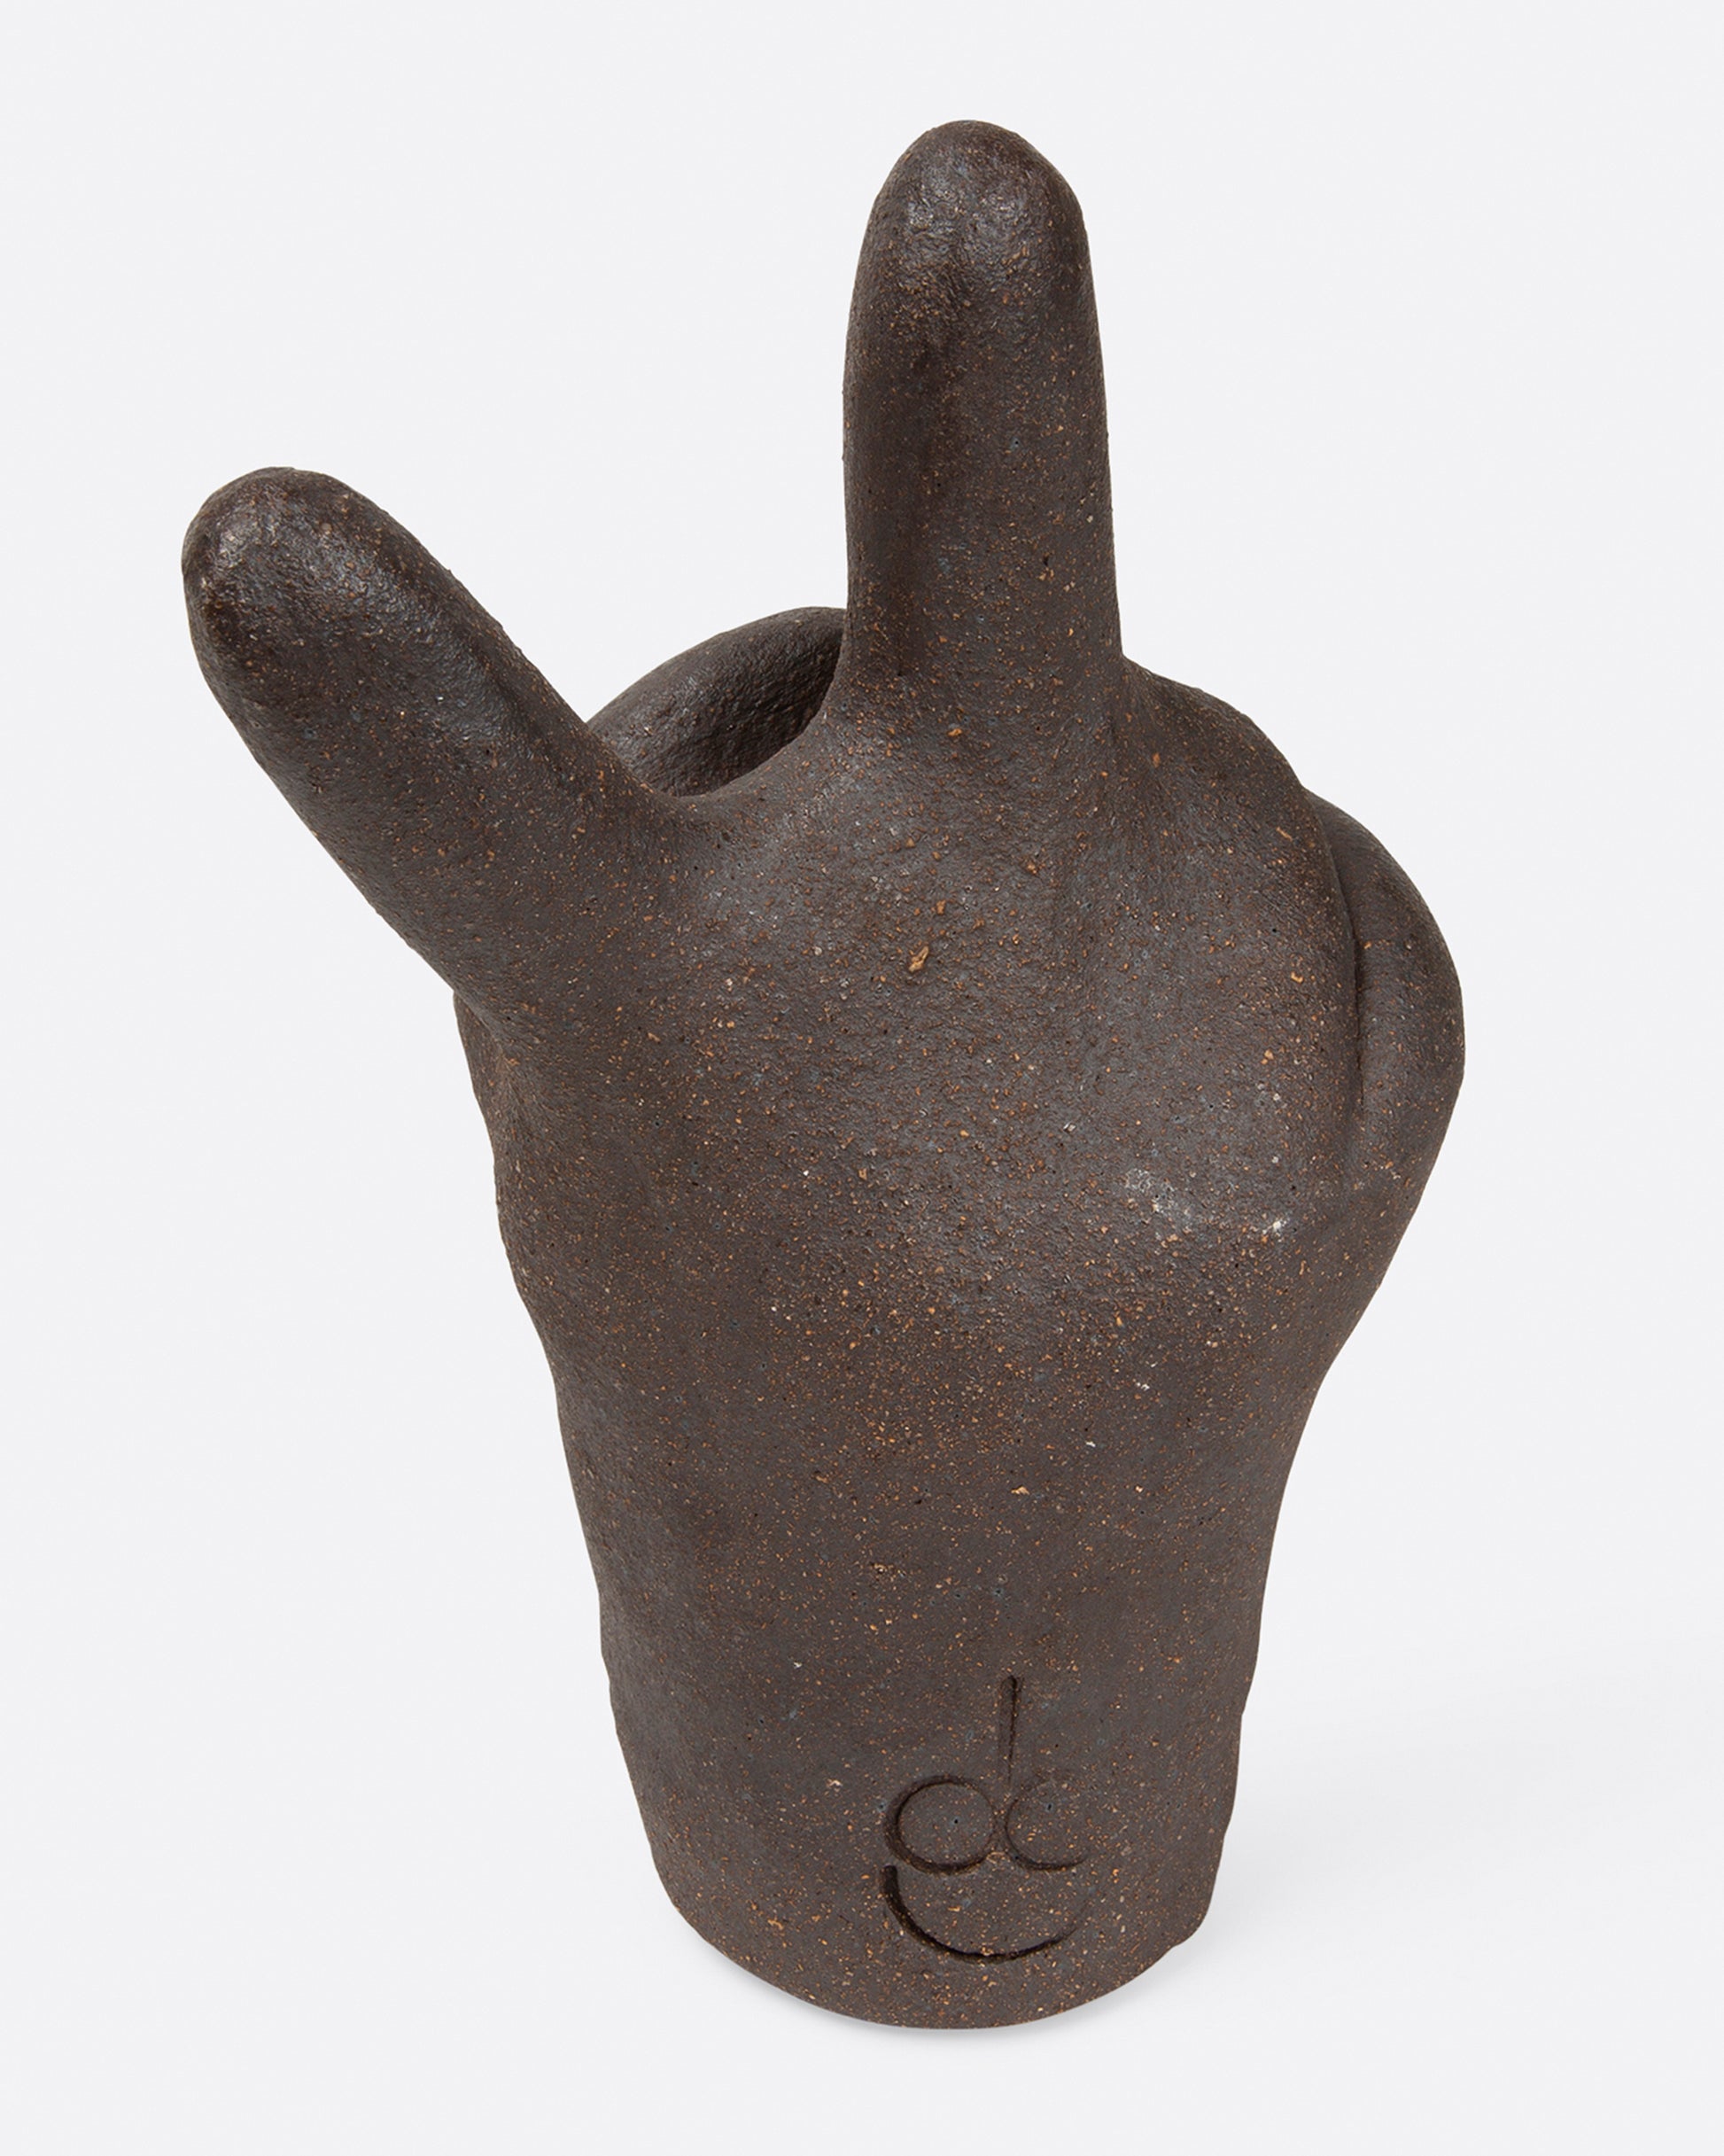 A large, dark brown peace hand sculpture, shown from the back.